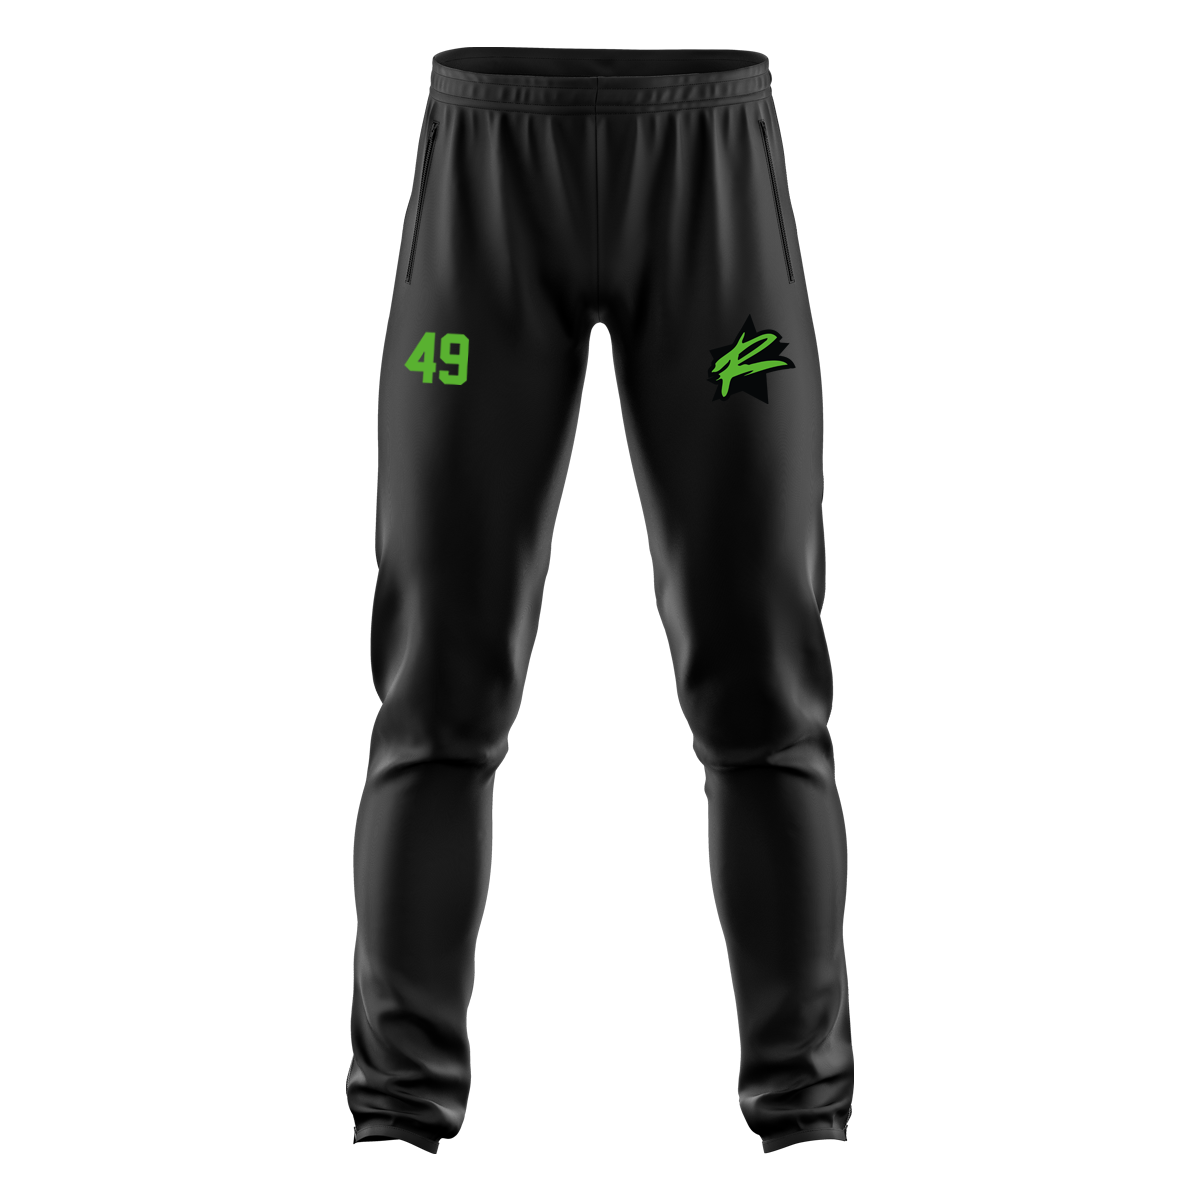 Rebels Leisure Pant with Playernumber/Initials